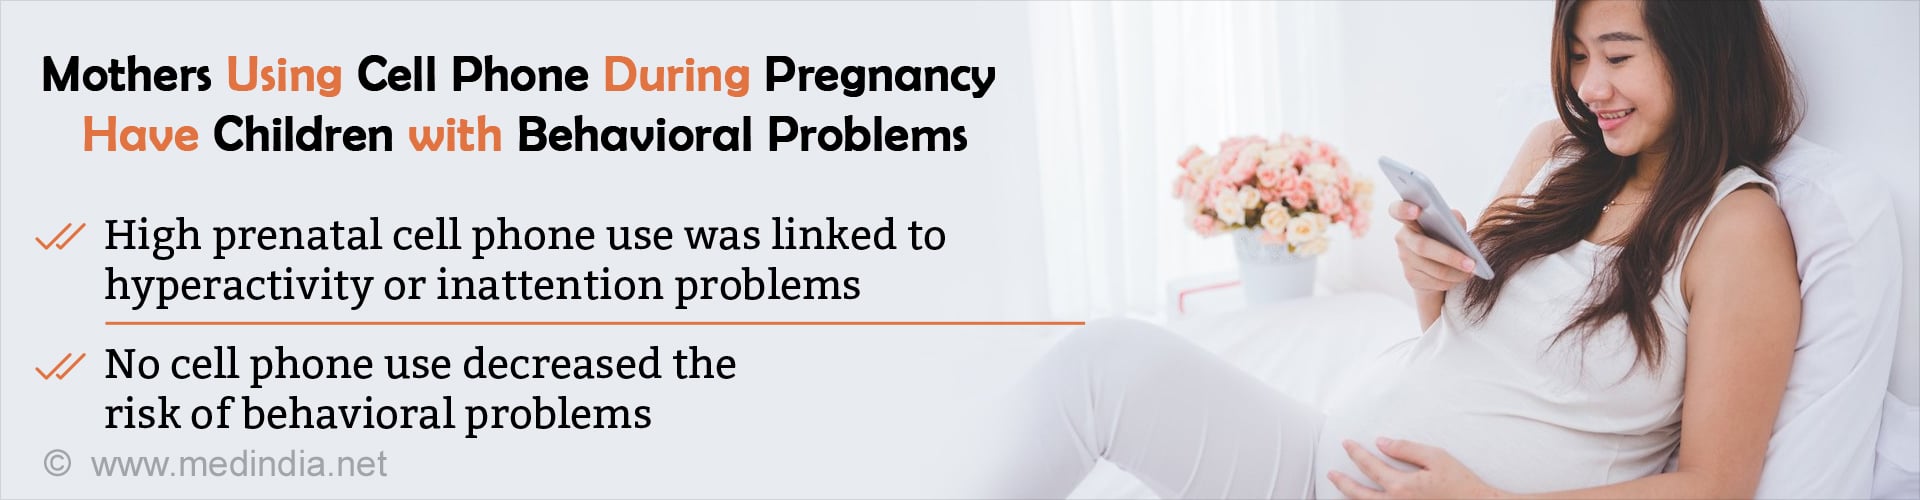 Mothers using cell phone during pregnancy have children with behavioral problems
- High prenatal cell phone use was linked to hyperactivity or inattention problems
- No cell phone use decreased the risk of behavioral problems